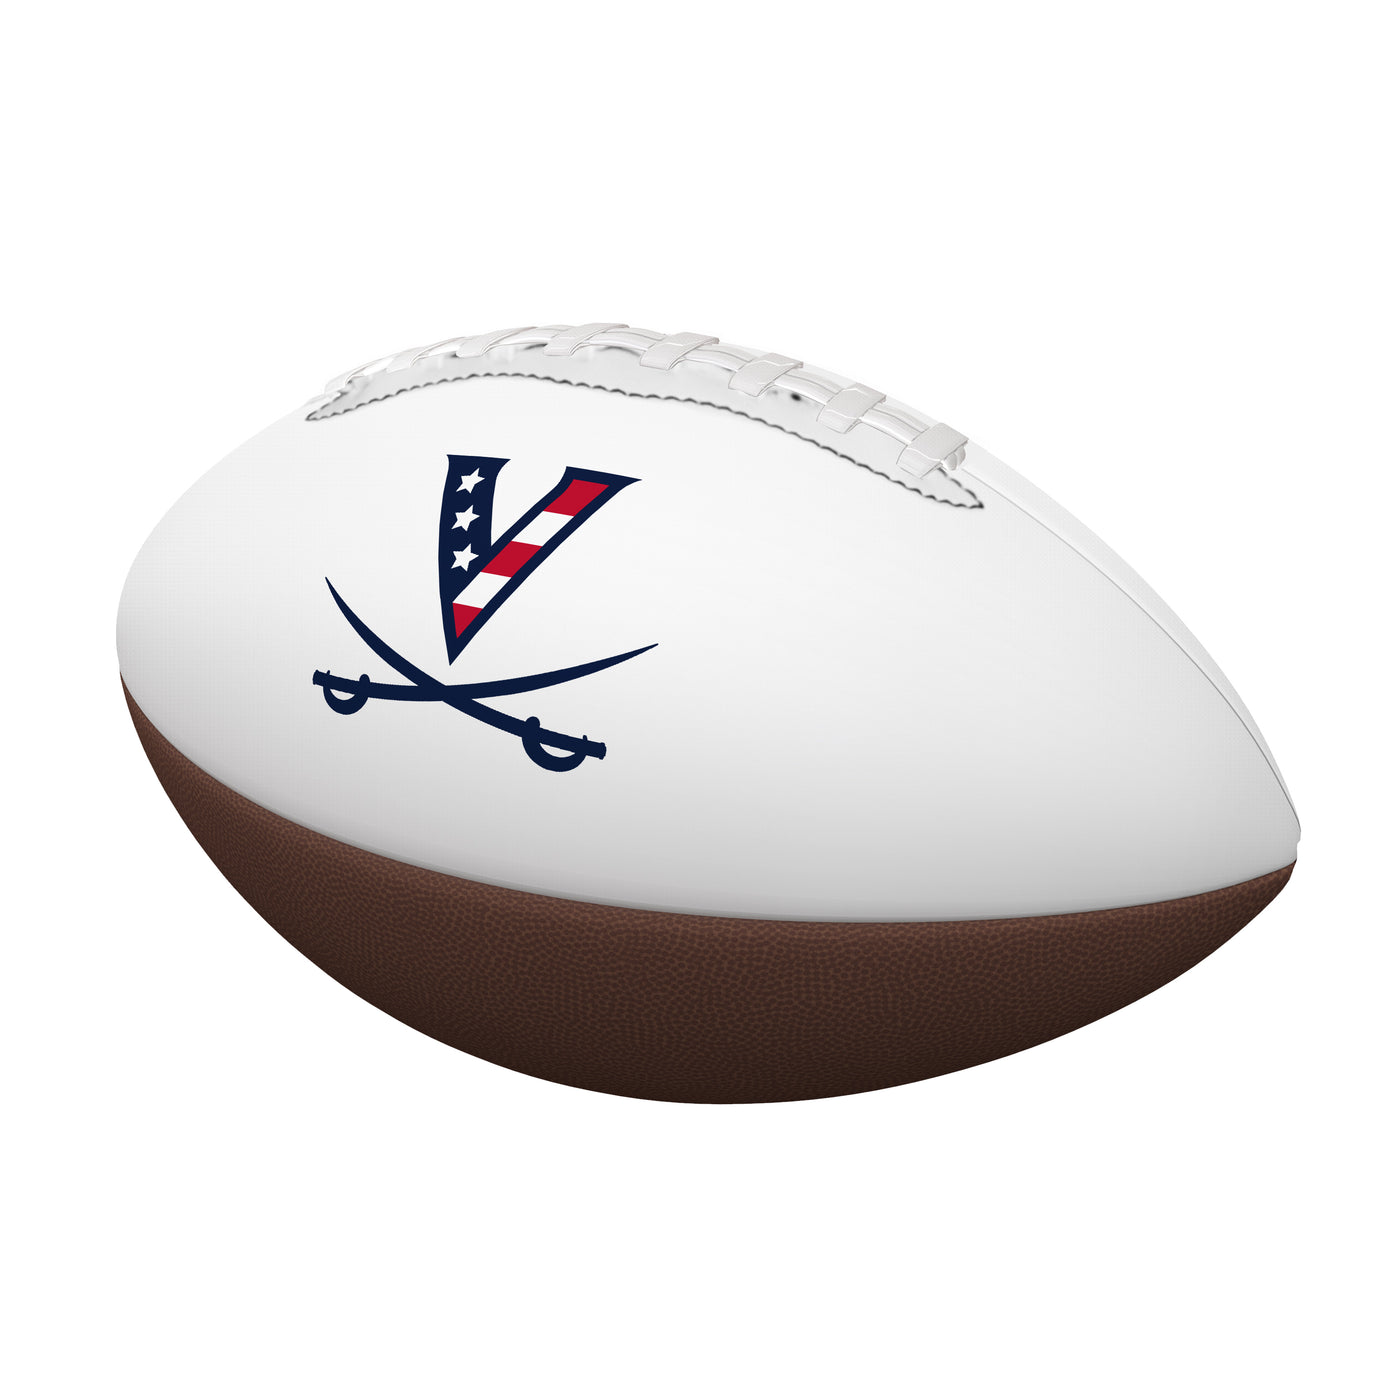 Virginia Red White and Hoo Full Size Autograph Football